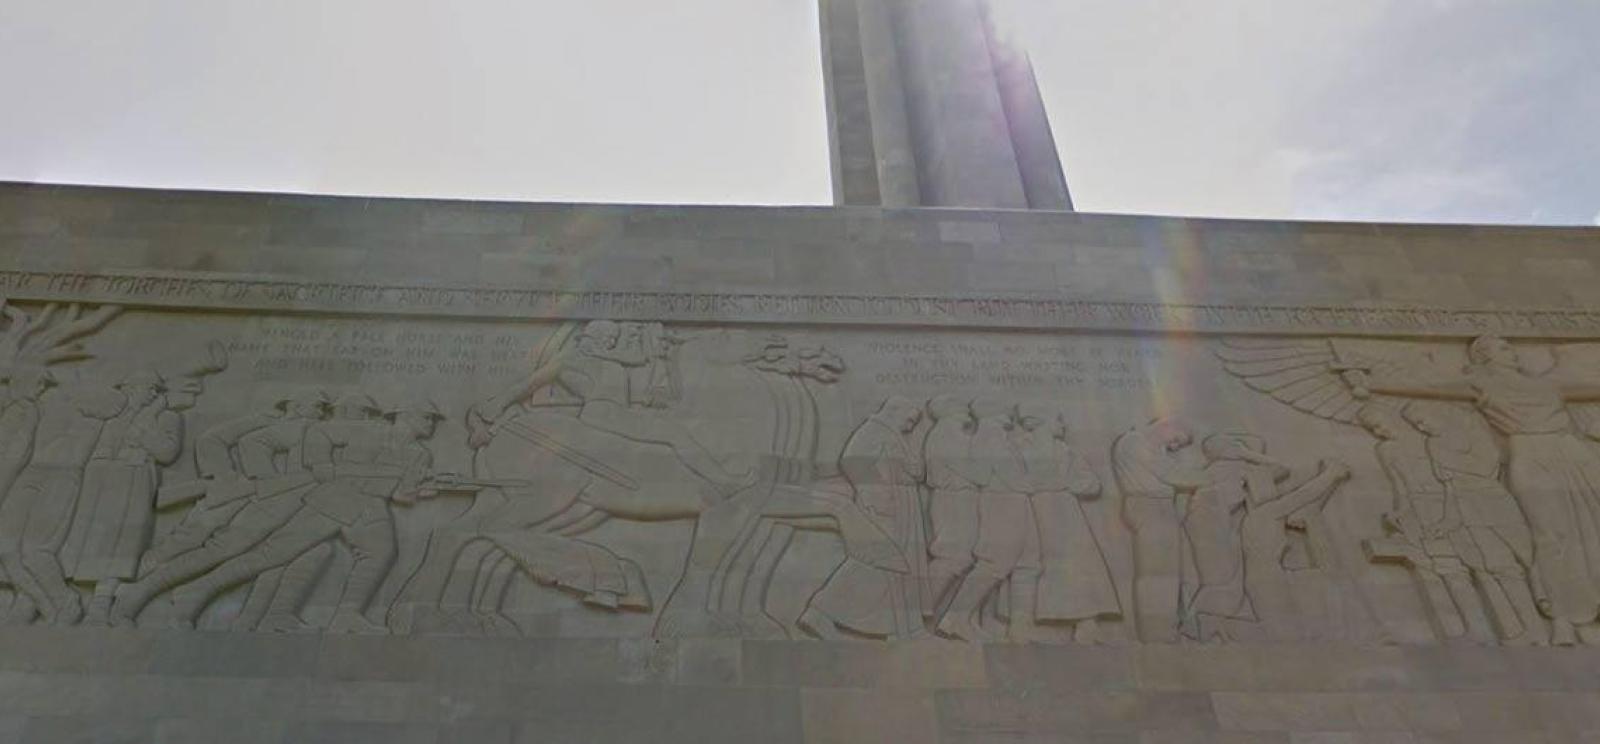 Modern photograph of the Great Frieze on the North Wall of the Liberty Memorial. Carved bas-relief figures populate the frieze: farmers, soldiers, riders on horses, and others.